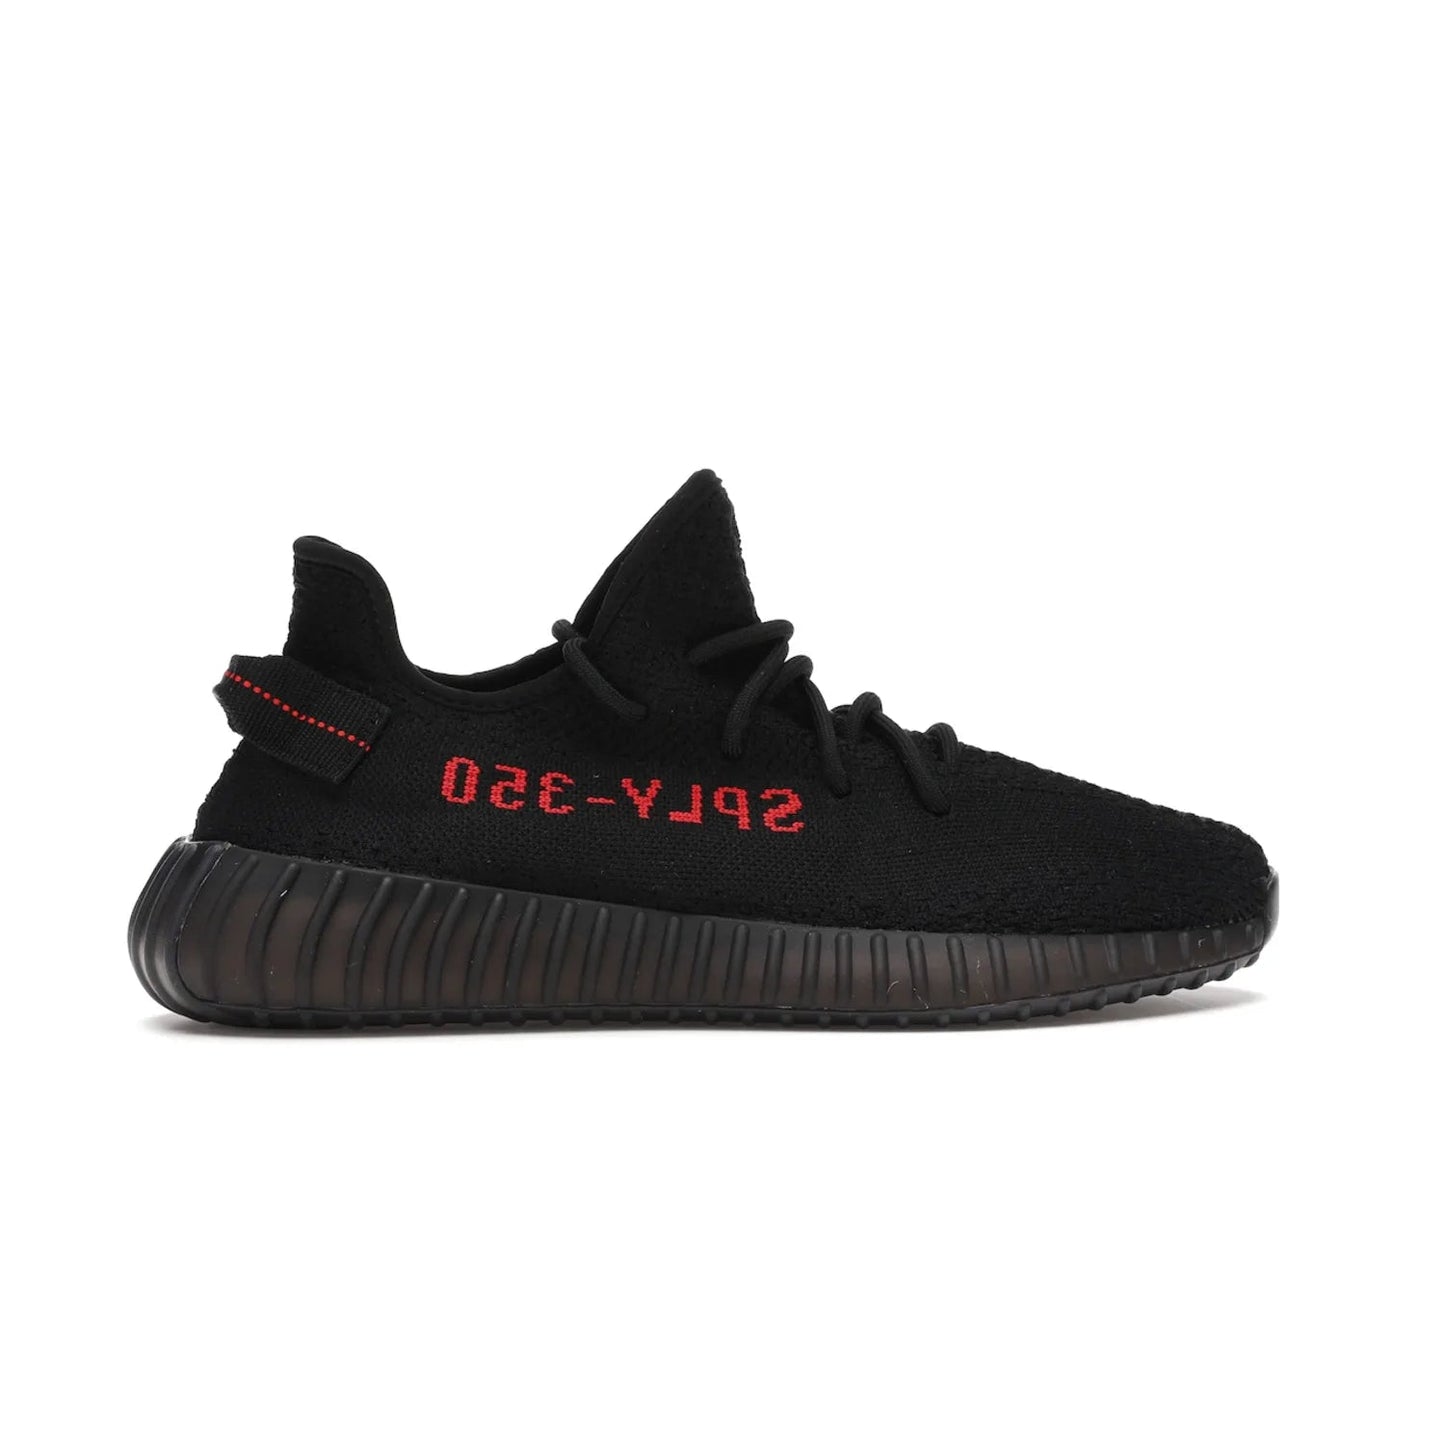 adidas Yeezy Boost 350 V2 Black Red (2017/2020) - Image 36 - Only at www.BallersClubKickz.com - Adidas Yeezy Boost 350 V2 Black Red: a classic colorway featuring black Primeknit upper, BOOST cushioning system, and iconic "SPLY-350" text. Released in 2017 for a retail price of $220.